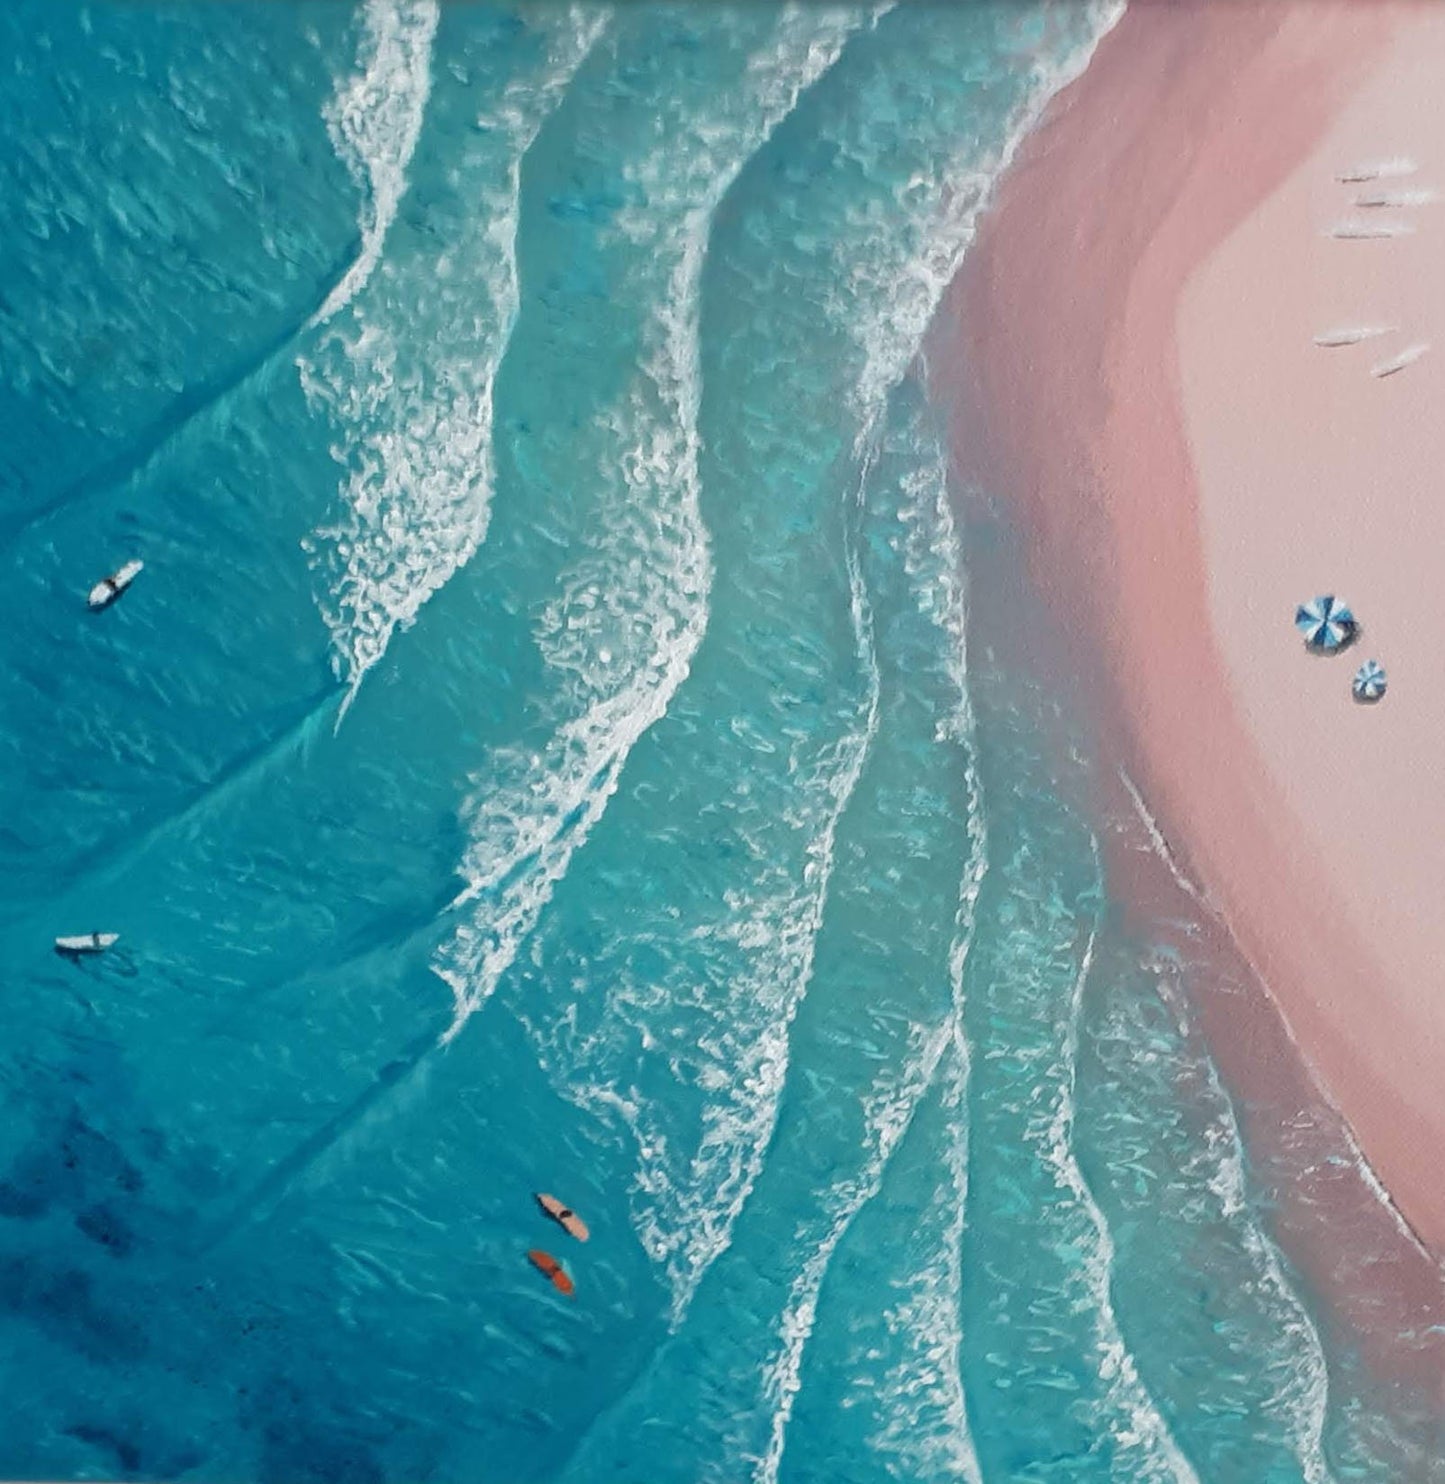 Surfers Paradise- An aerial view painting of pink sand beach and turquoise water